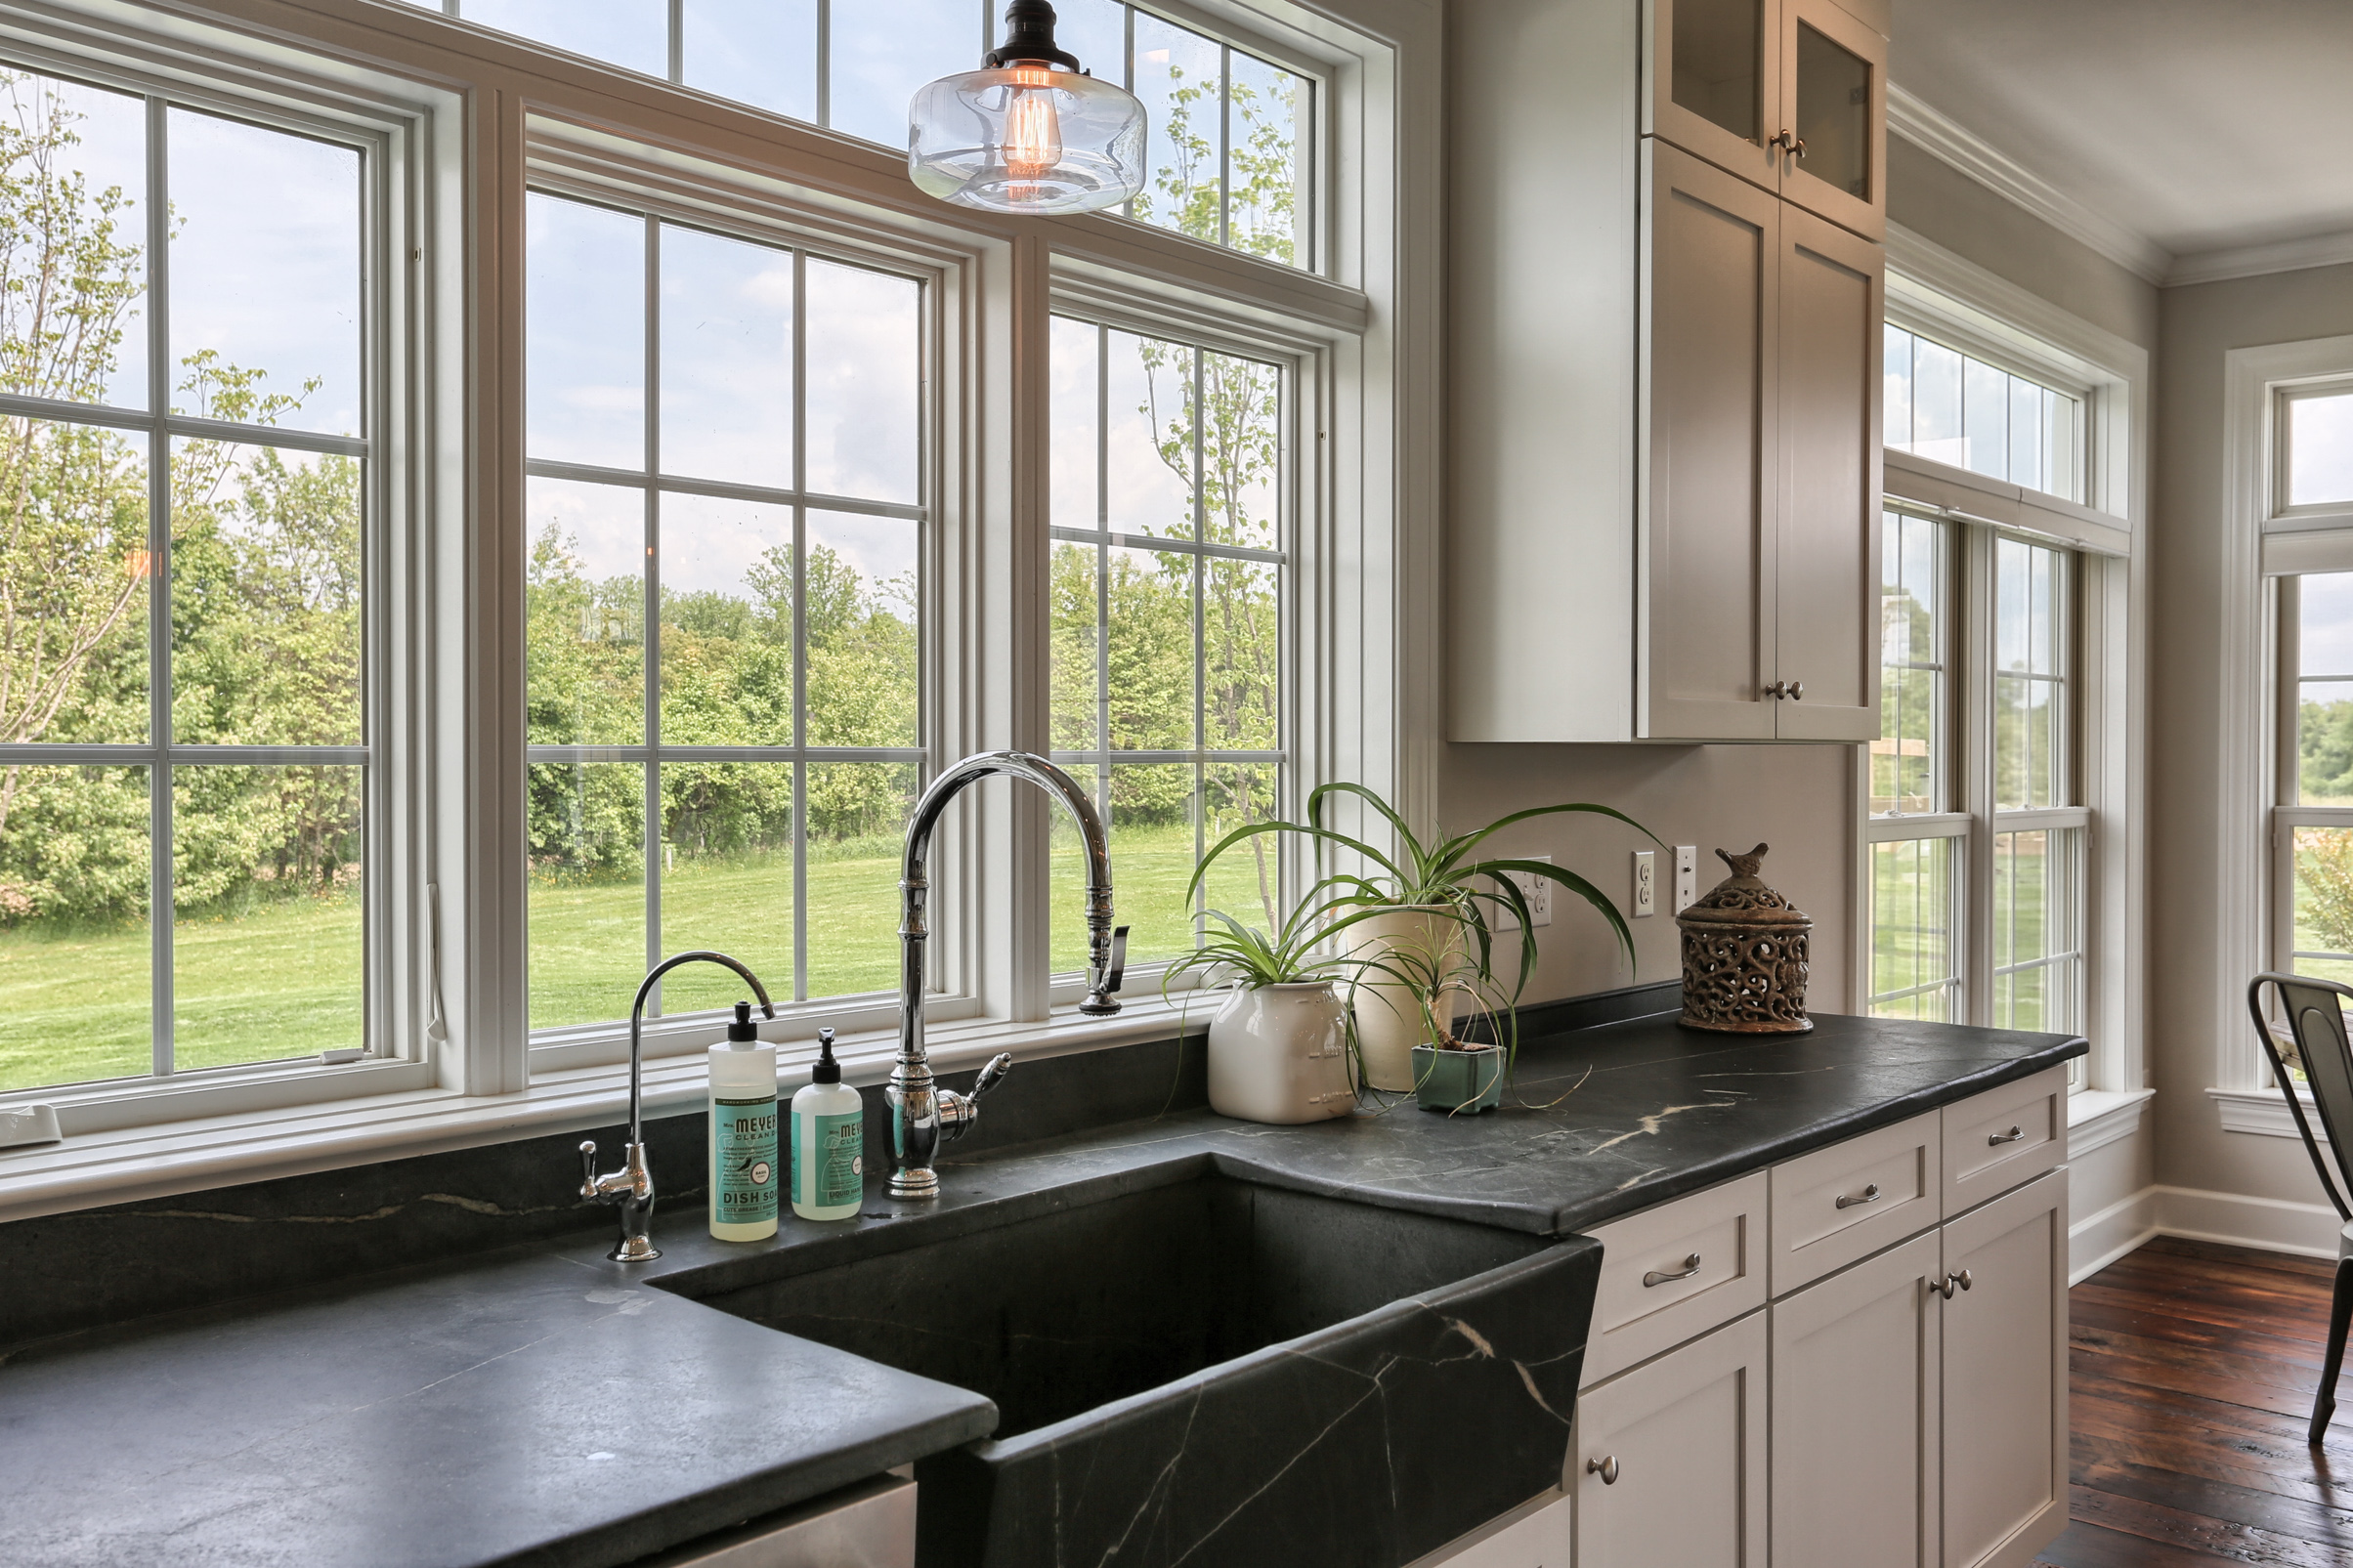 Project Spotlight: A Country Farmhouse Kitchen